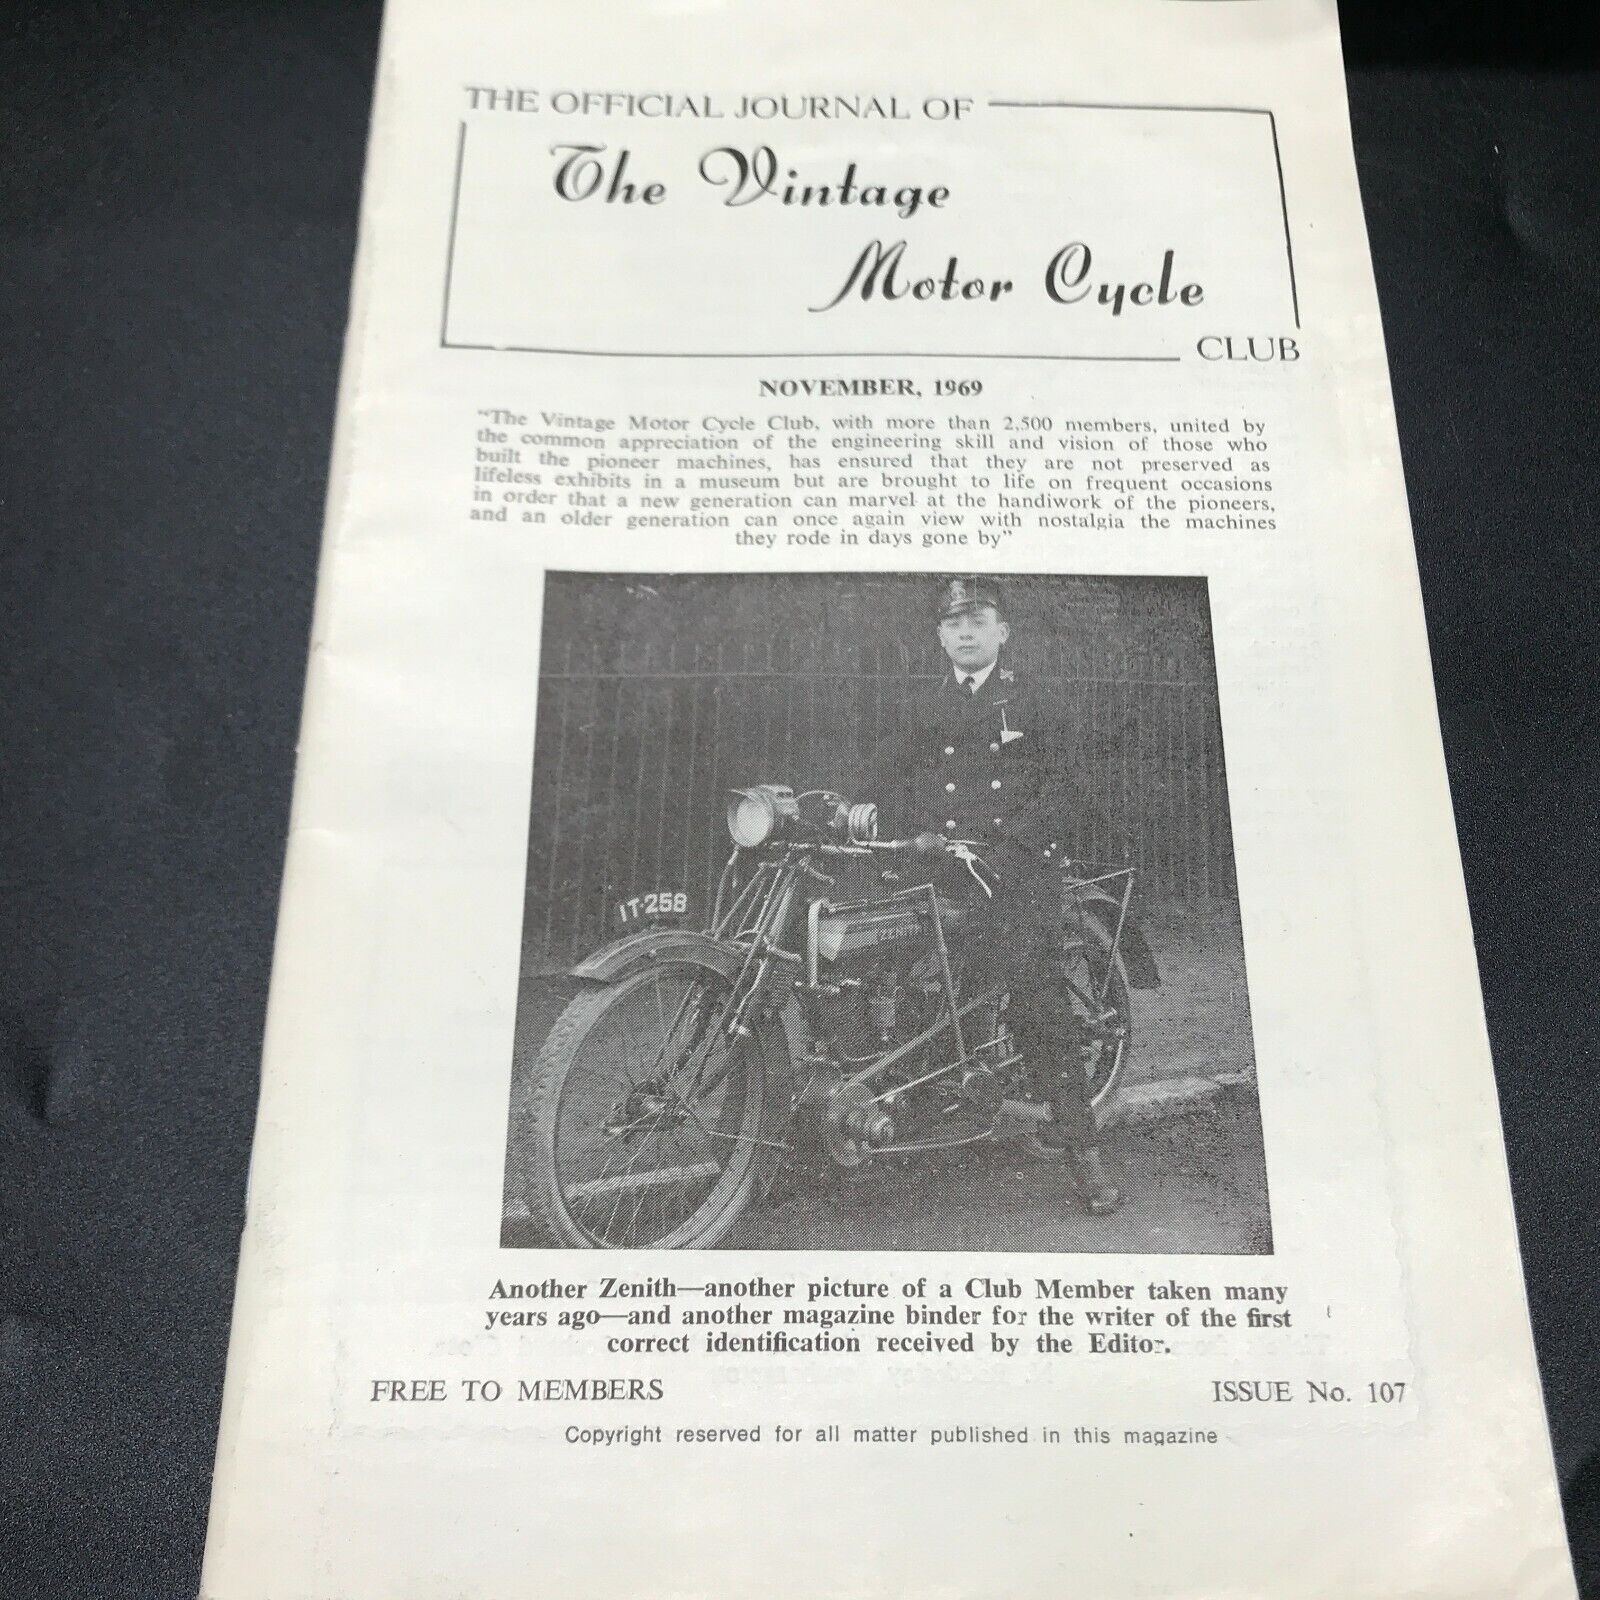 THE OFFICIAL JOURNAL THE VINTAGE MOTORCYCLE CLUB MAGAZINE NOVEMBER 1969 ZENITH